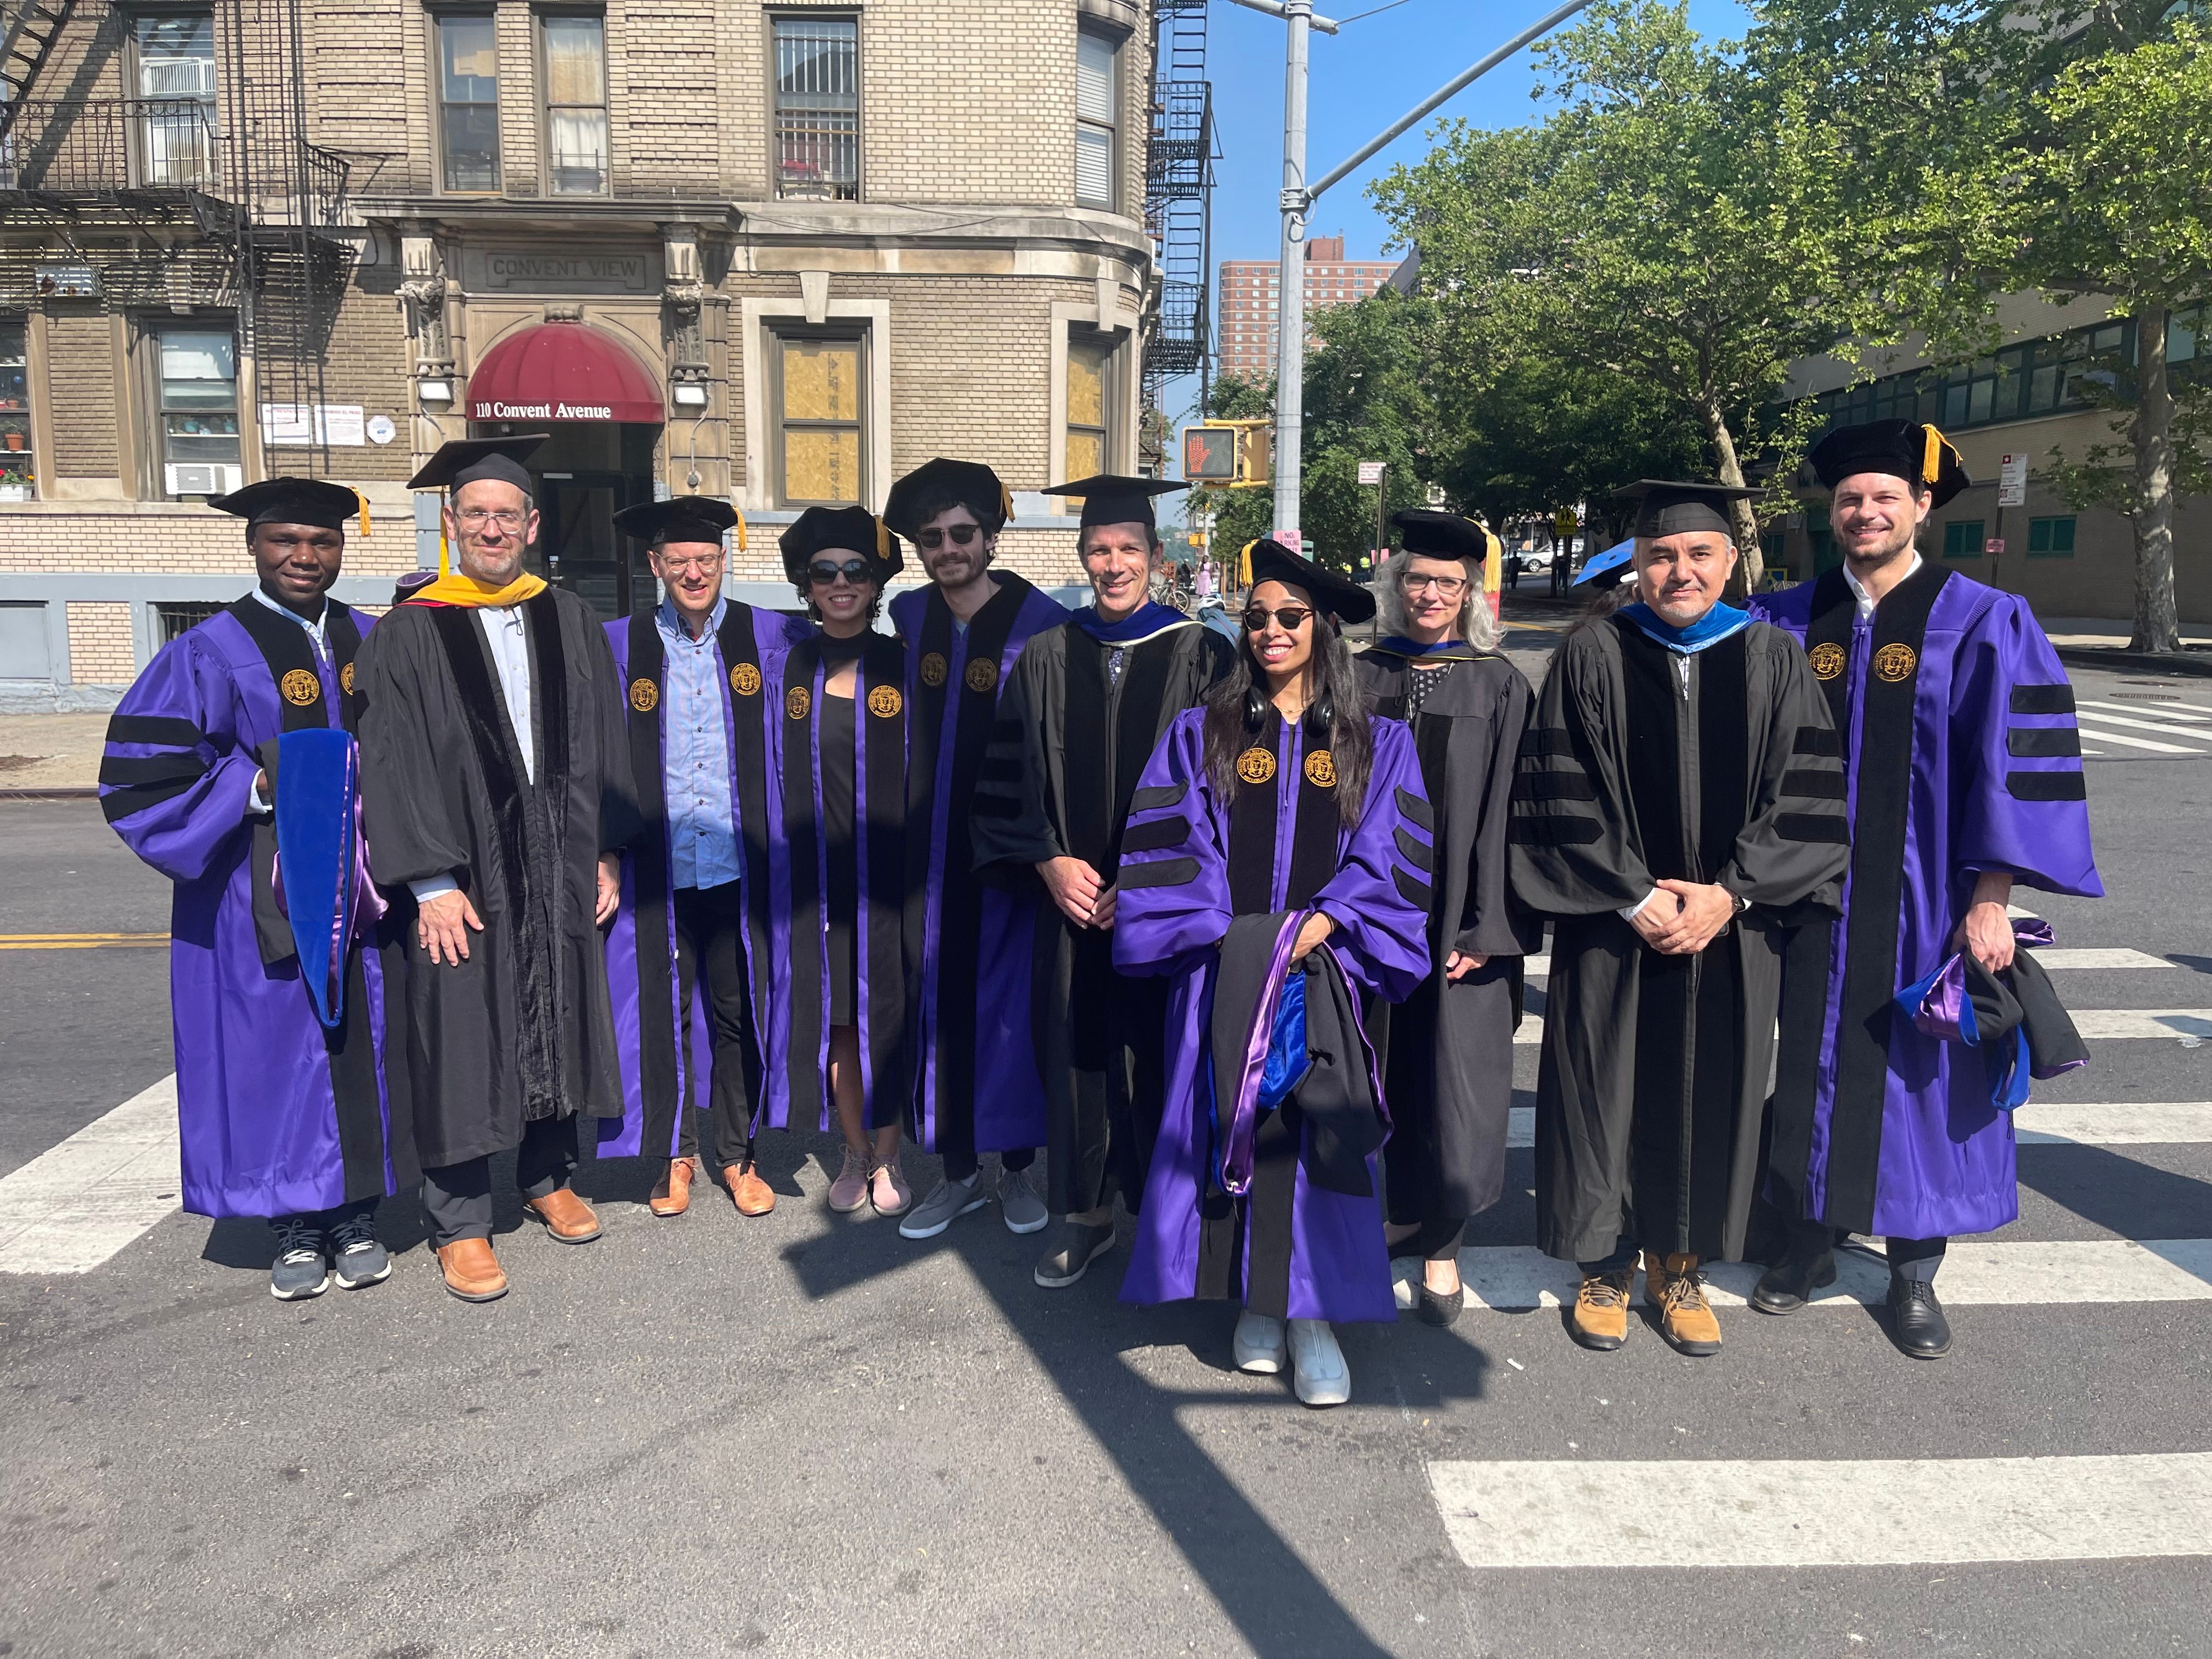 2023 BME PhD graduates with their mentors, pictured from left to right: Adantchede Louis Zannou, Prof. Marom Bikson, Maximilian Nentwich, Forouzan Vasheghani Farahani, Lukas Hirsch, Prof. Lucas Parra, Michelle Gelbs, Prof. Susannah Fritton, Prof. Luis Cardoso, Andrea Corti. (not pictured: Judy Alper, James Padgett, Prof. Mitchell Schaffler)